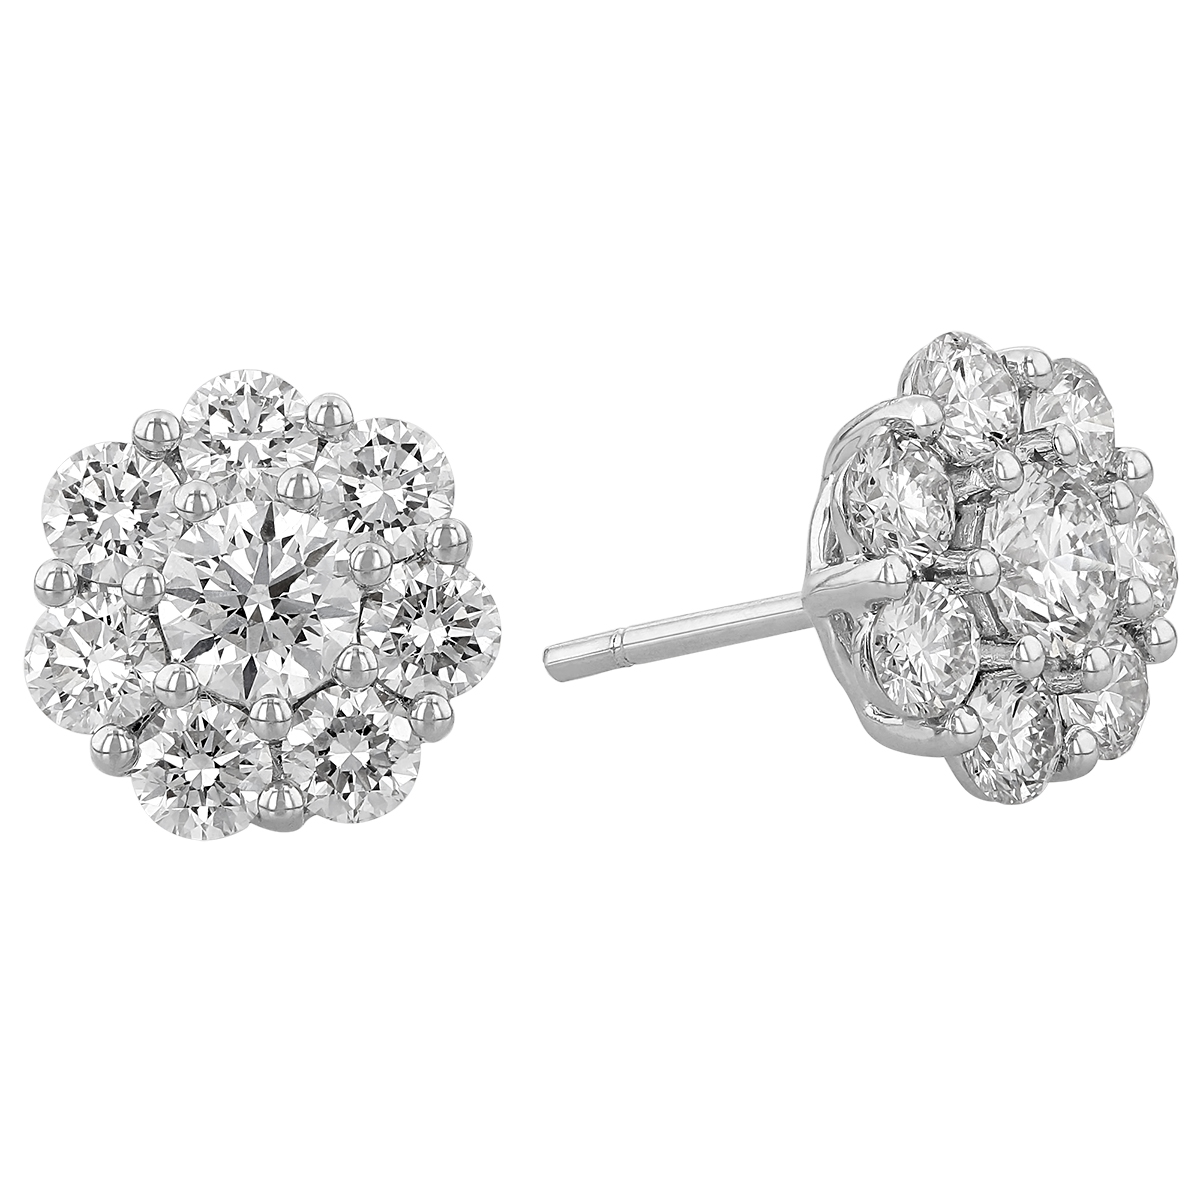 Lab Grown Round Diamond Cluster Stud Earrings in White Gold, 1.96 cttw